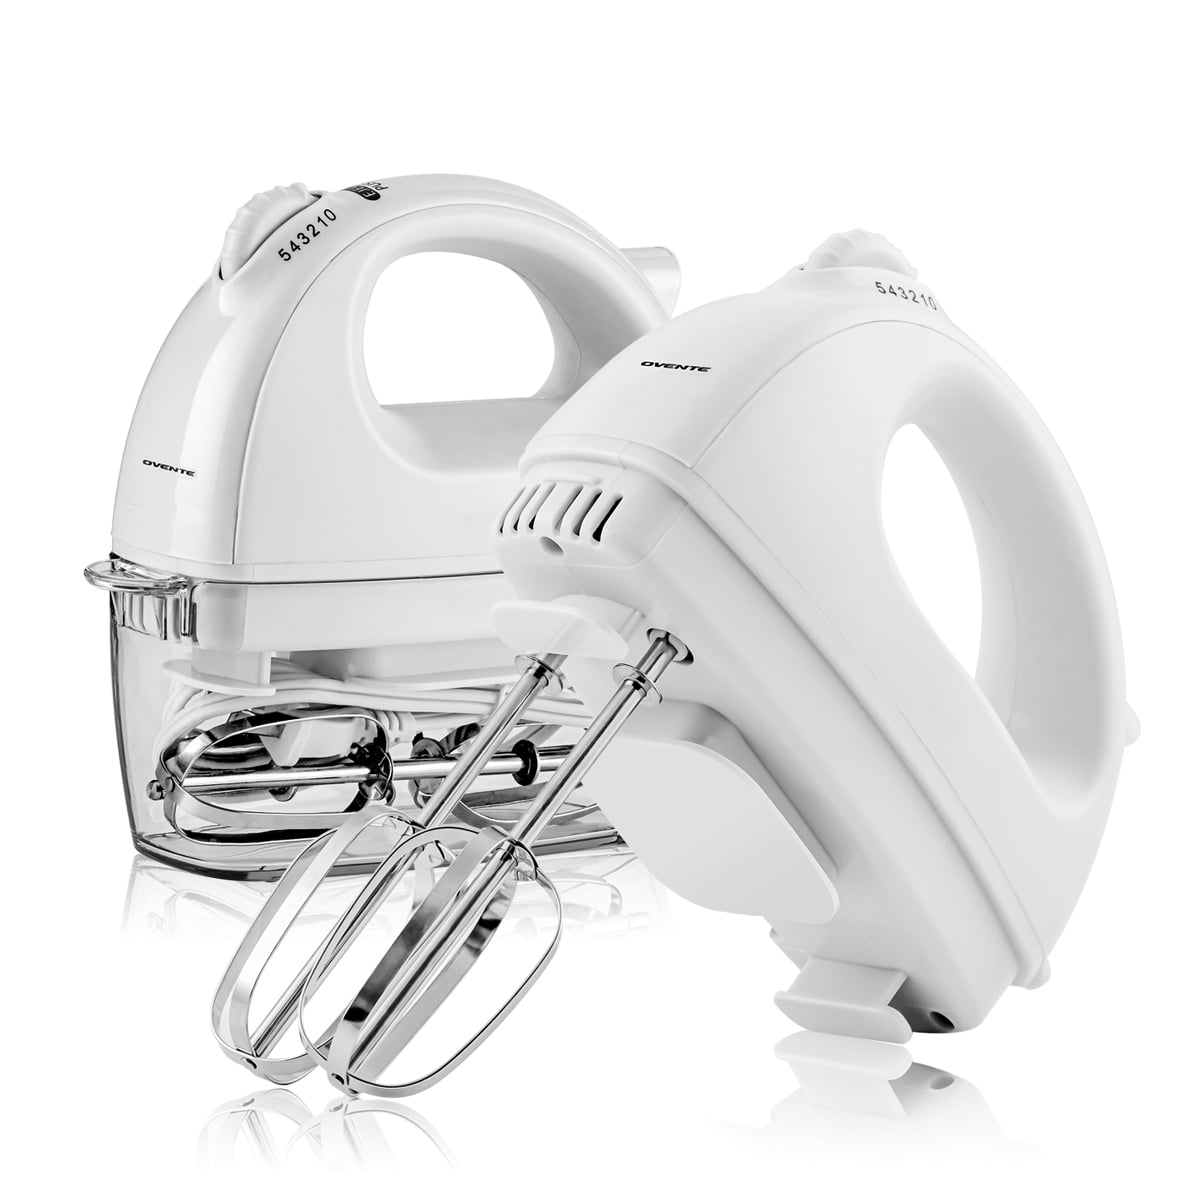 OVENTE 1.8 lb Portable 5 Speed Mixing Electric Hand Mixer, Compact Great  for Baking, New Red HM151R 